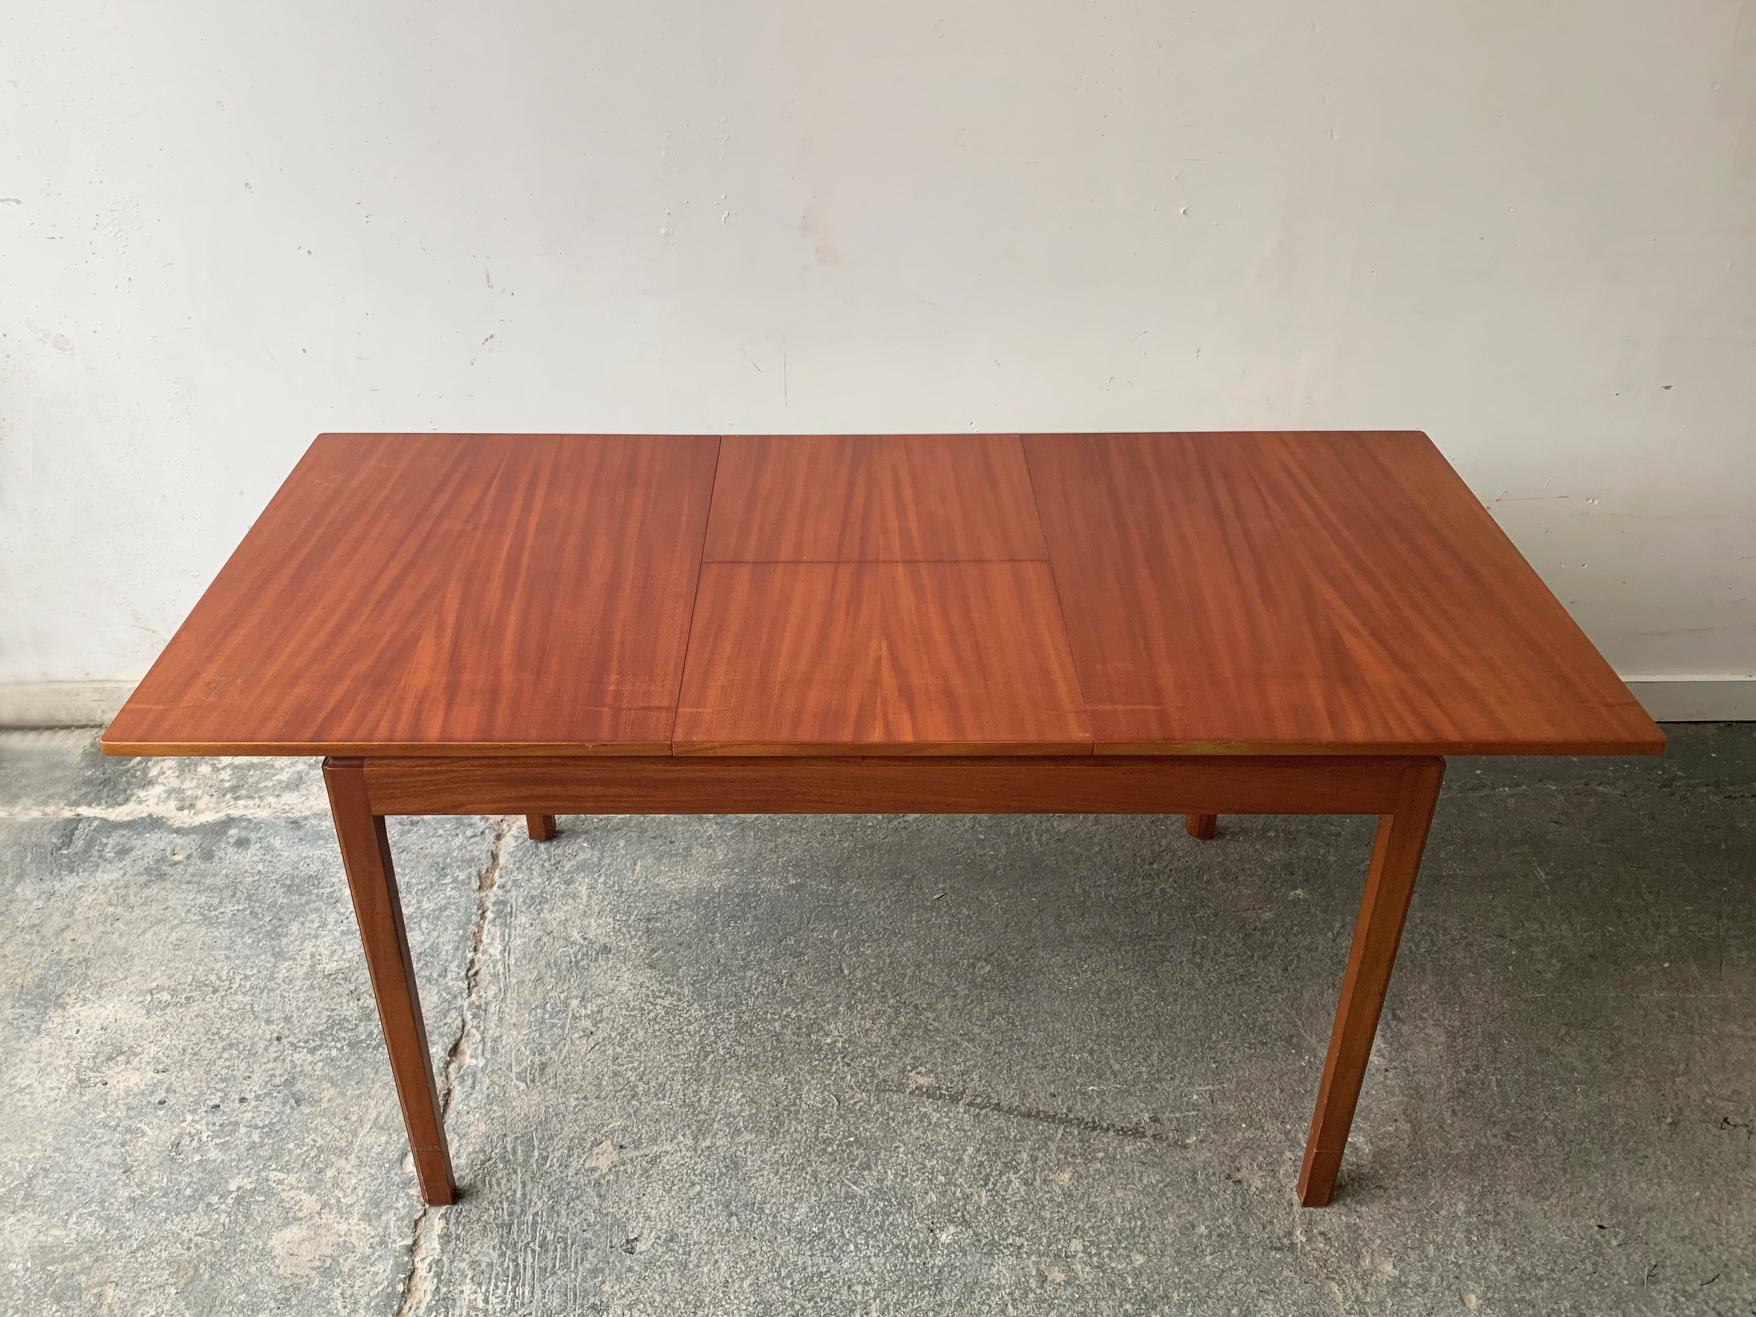 A clean lined minimal Danish style dining table with subtly elevated table top. Produced in the 1960’s by highly respected manufacturer A.H.Mcintosh & co. Ltd. of Kirkcaldy Scotland UK.

4 matching dining chairs available, which are being